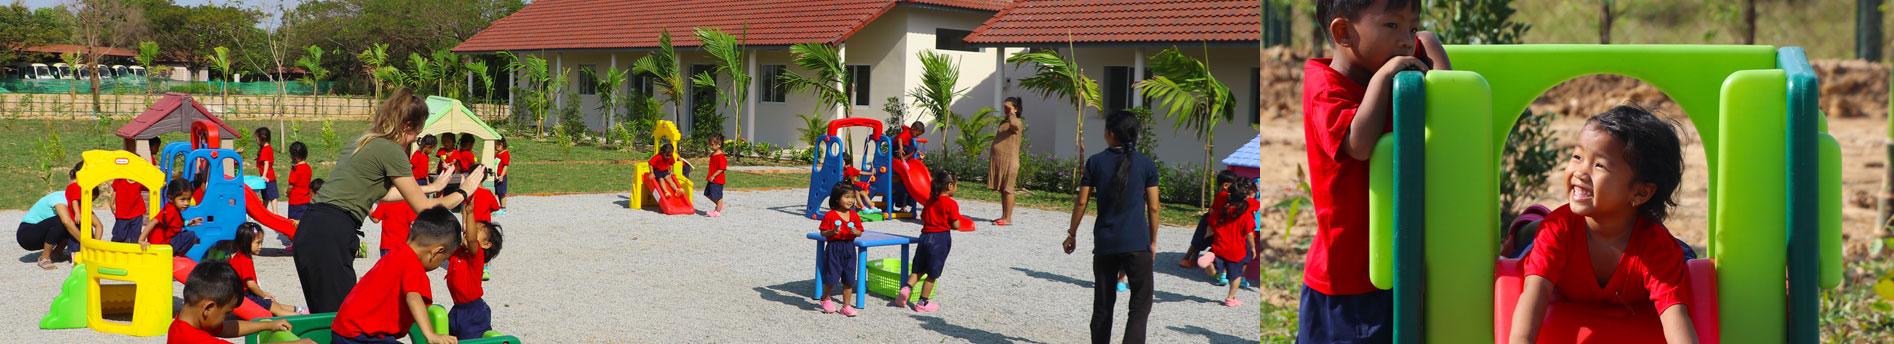 JPA students playing our new preschool wing. JPA Teachers welcomed over 160 two and three year old children to our beautiful, purpose-built facilities. Jay Pritzker Academy, Siem Reap, Cambodia. Jay-Pritzker-Academy-Siem-Reap-Cambodia.